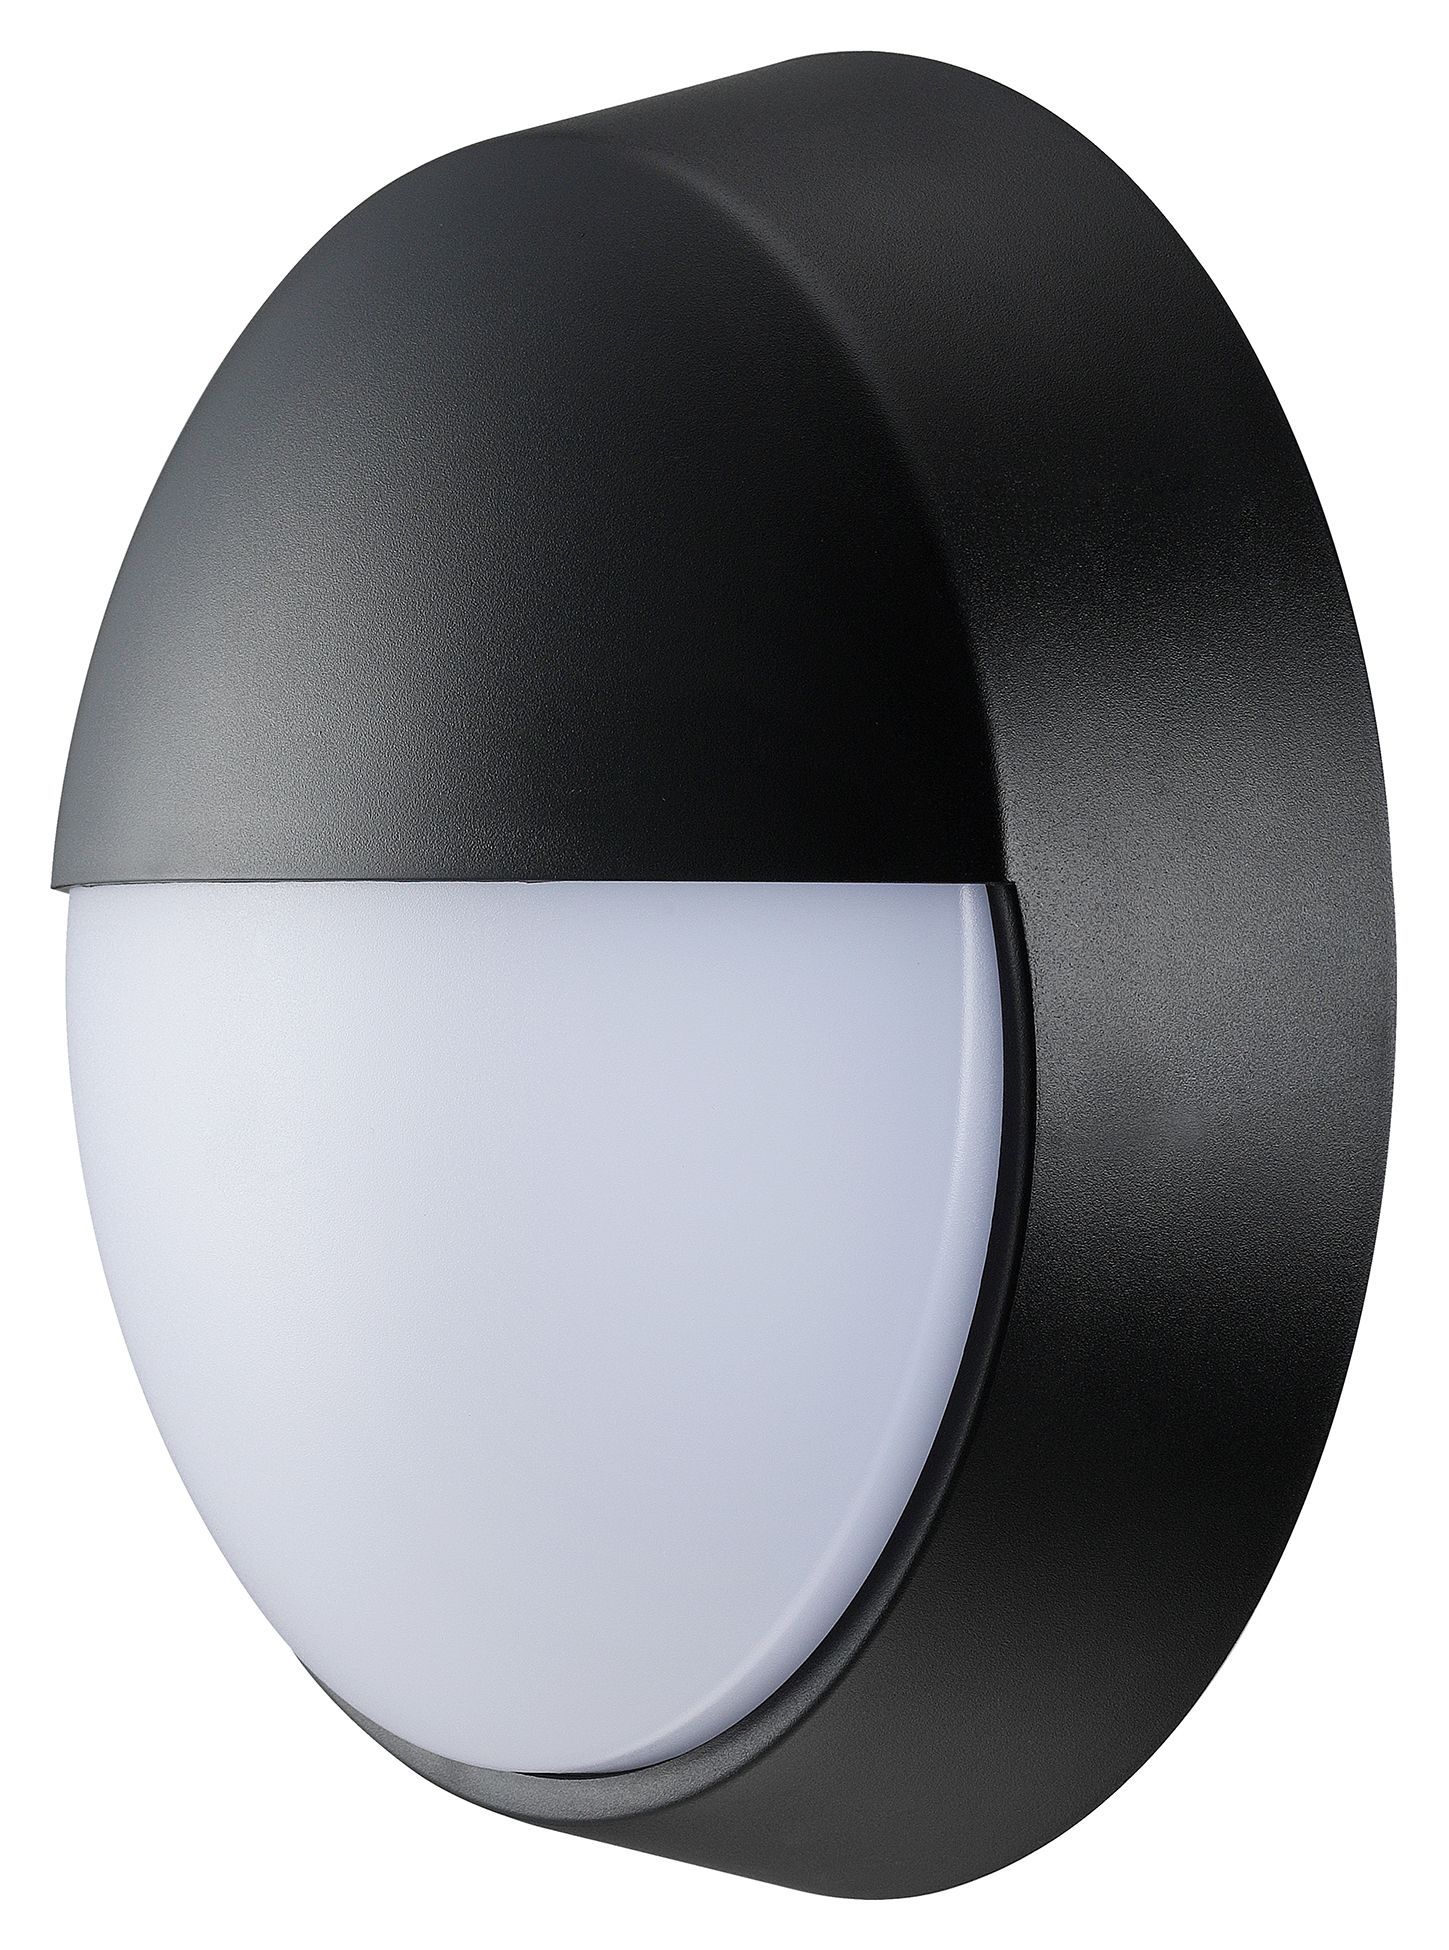 Image of Luceco Eco Round Bulkhead Eyelid IP54 Supplied Black and White Trim 400LM 10W 4000K